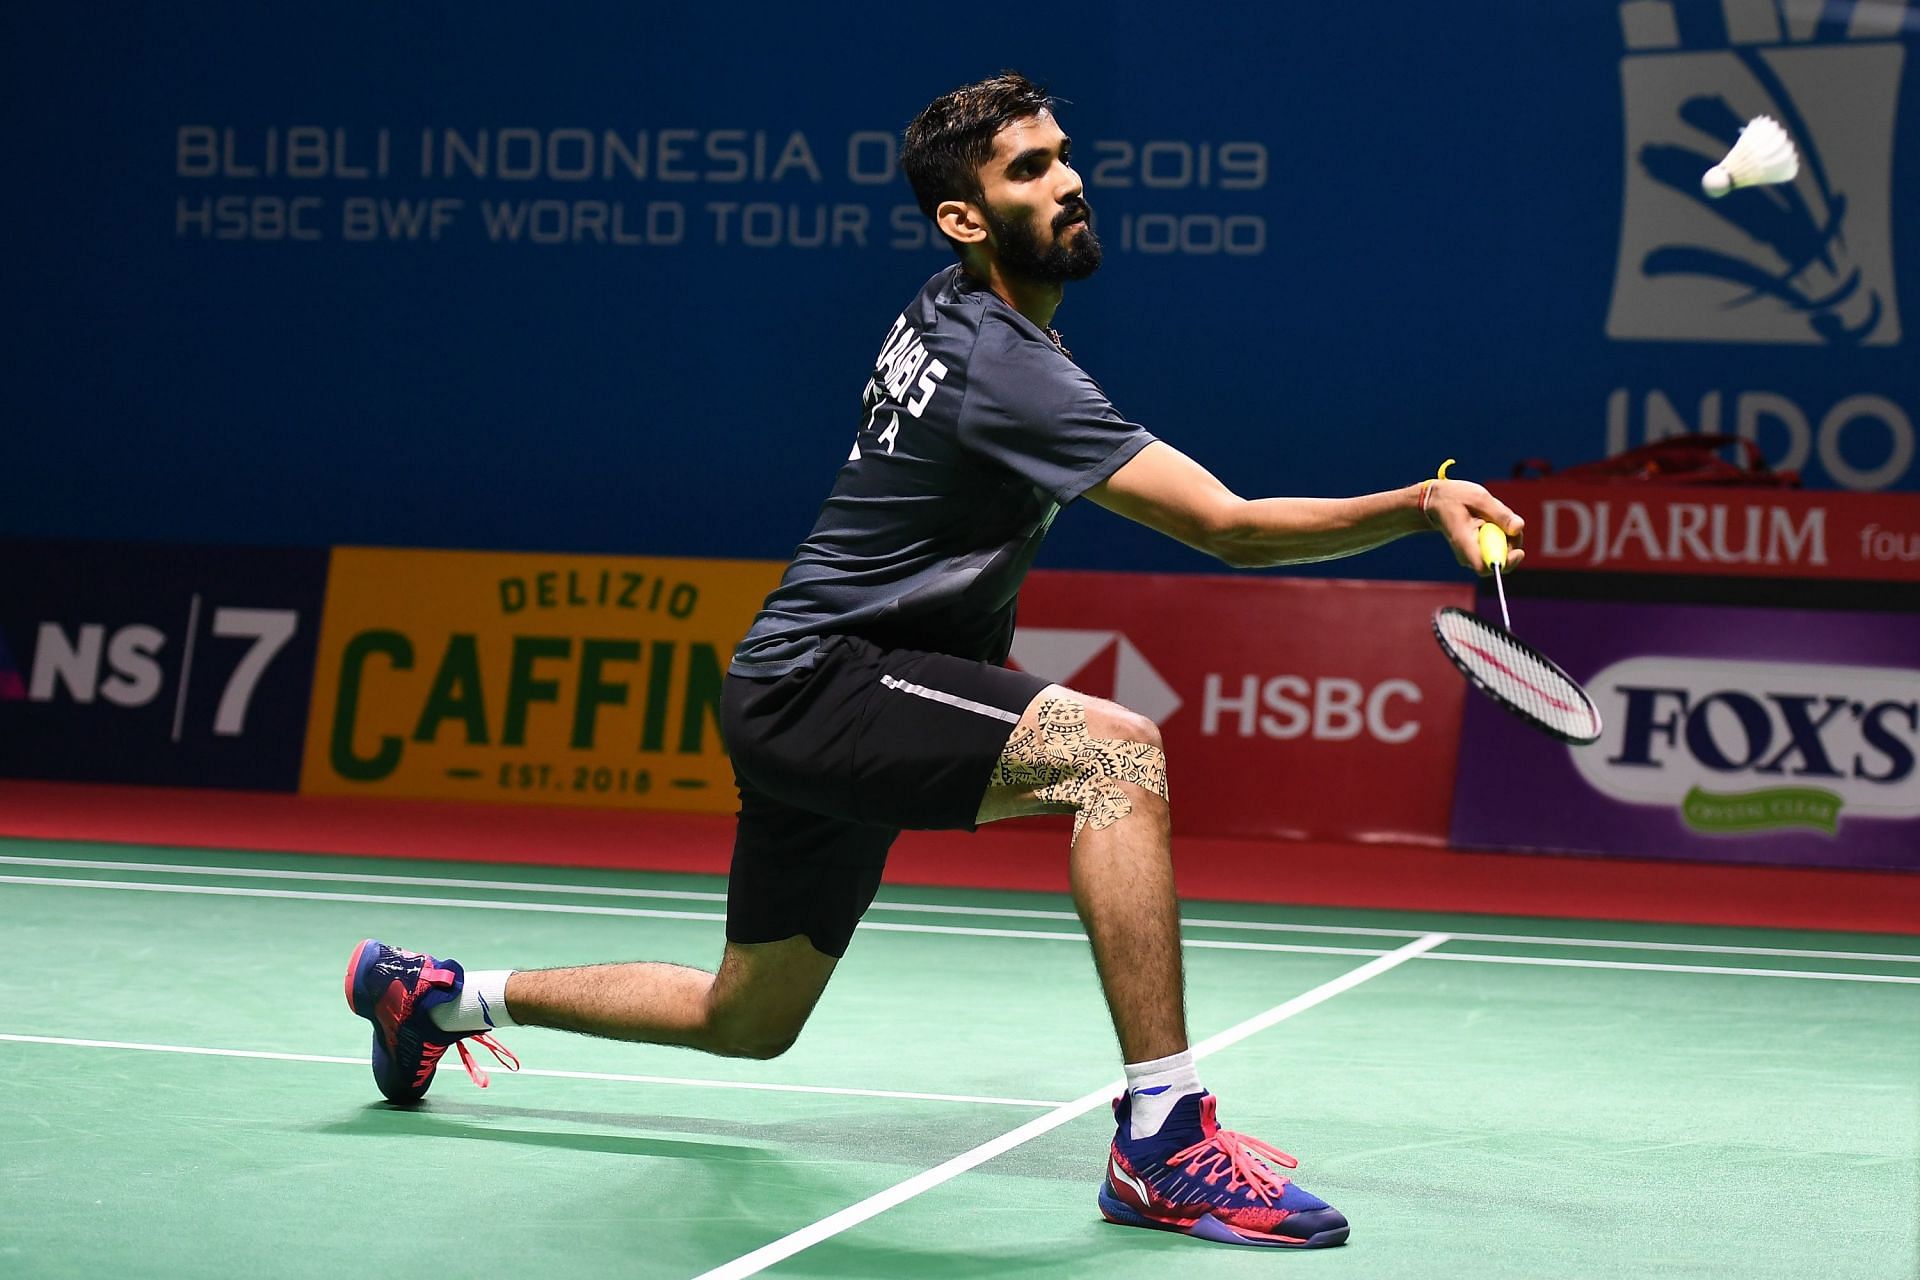 Srikanth in action at an earlier edition of the Indonesia Open. (Image courtesy: Getty Images)